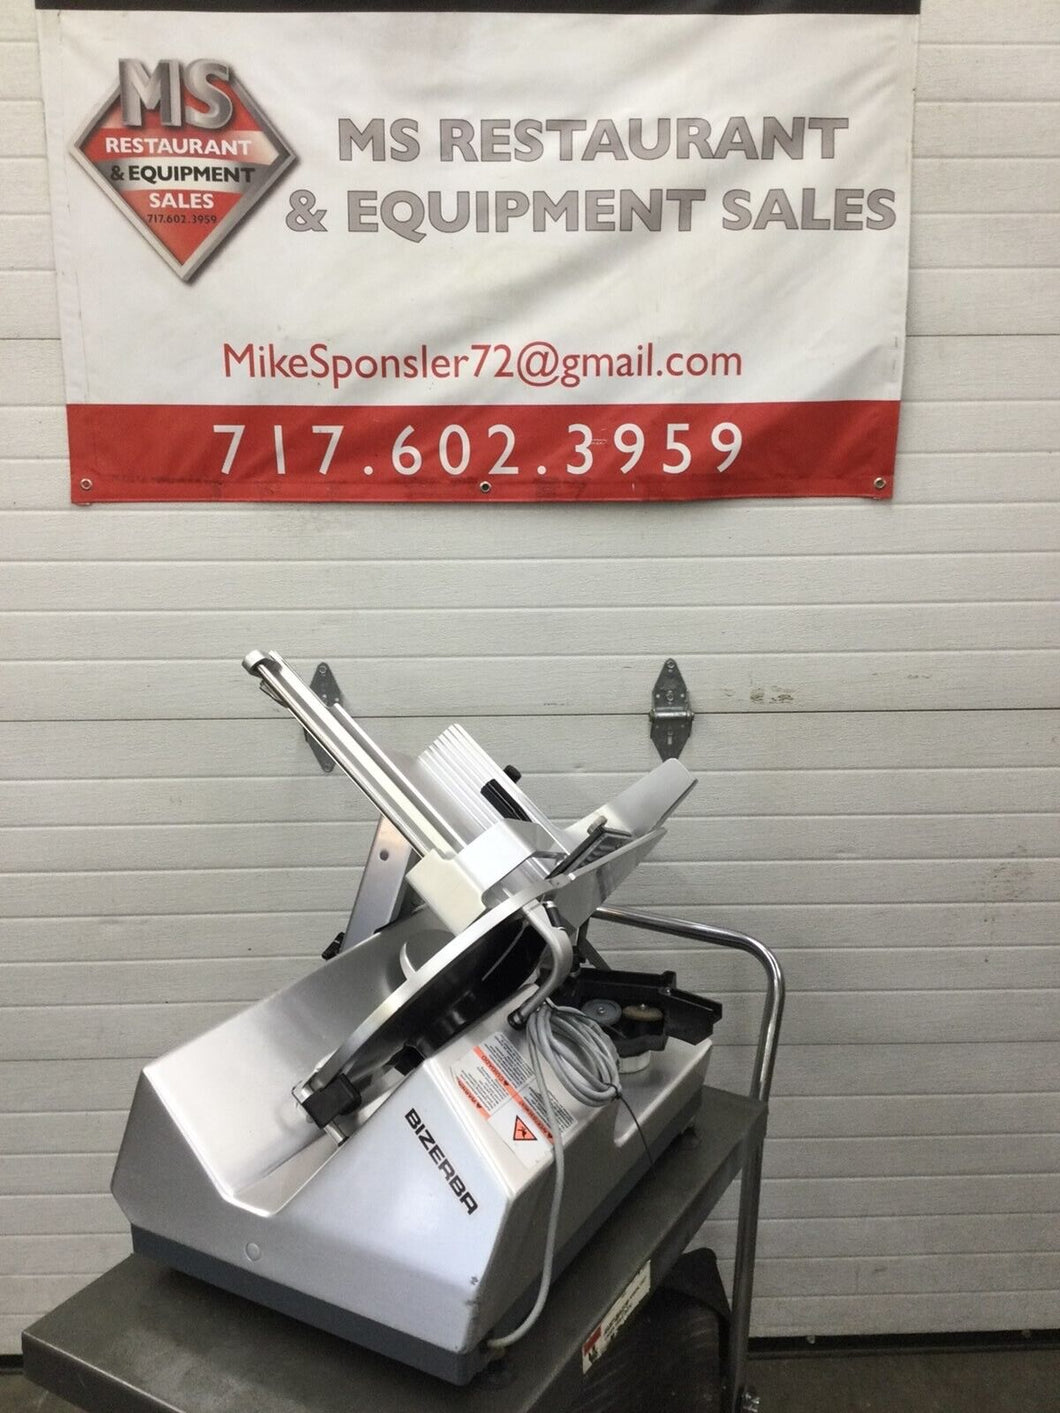 Bizerba GSPHD 2014 Automatic Deli Slicer w/ Sharpener Tested and Working!